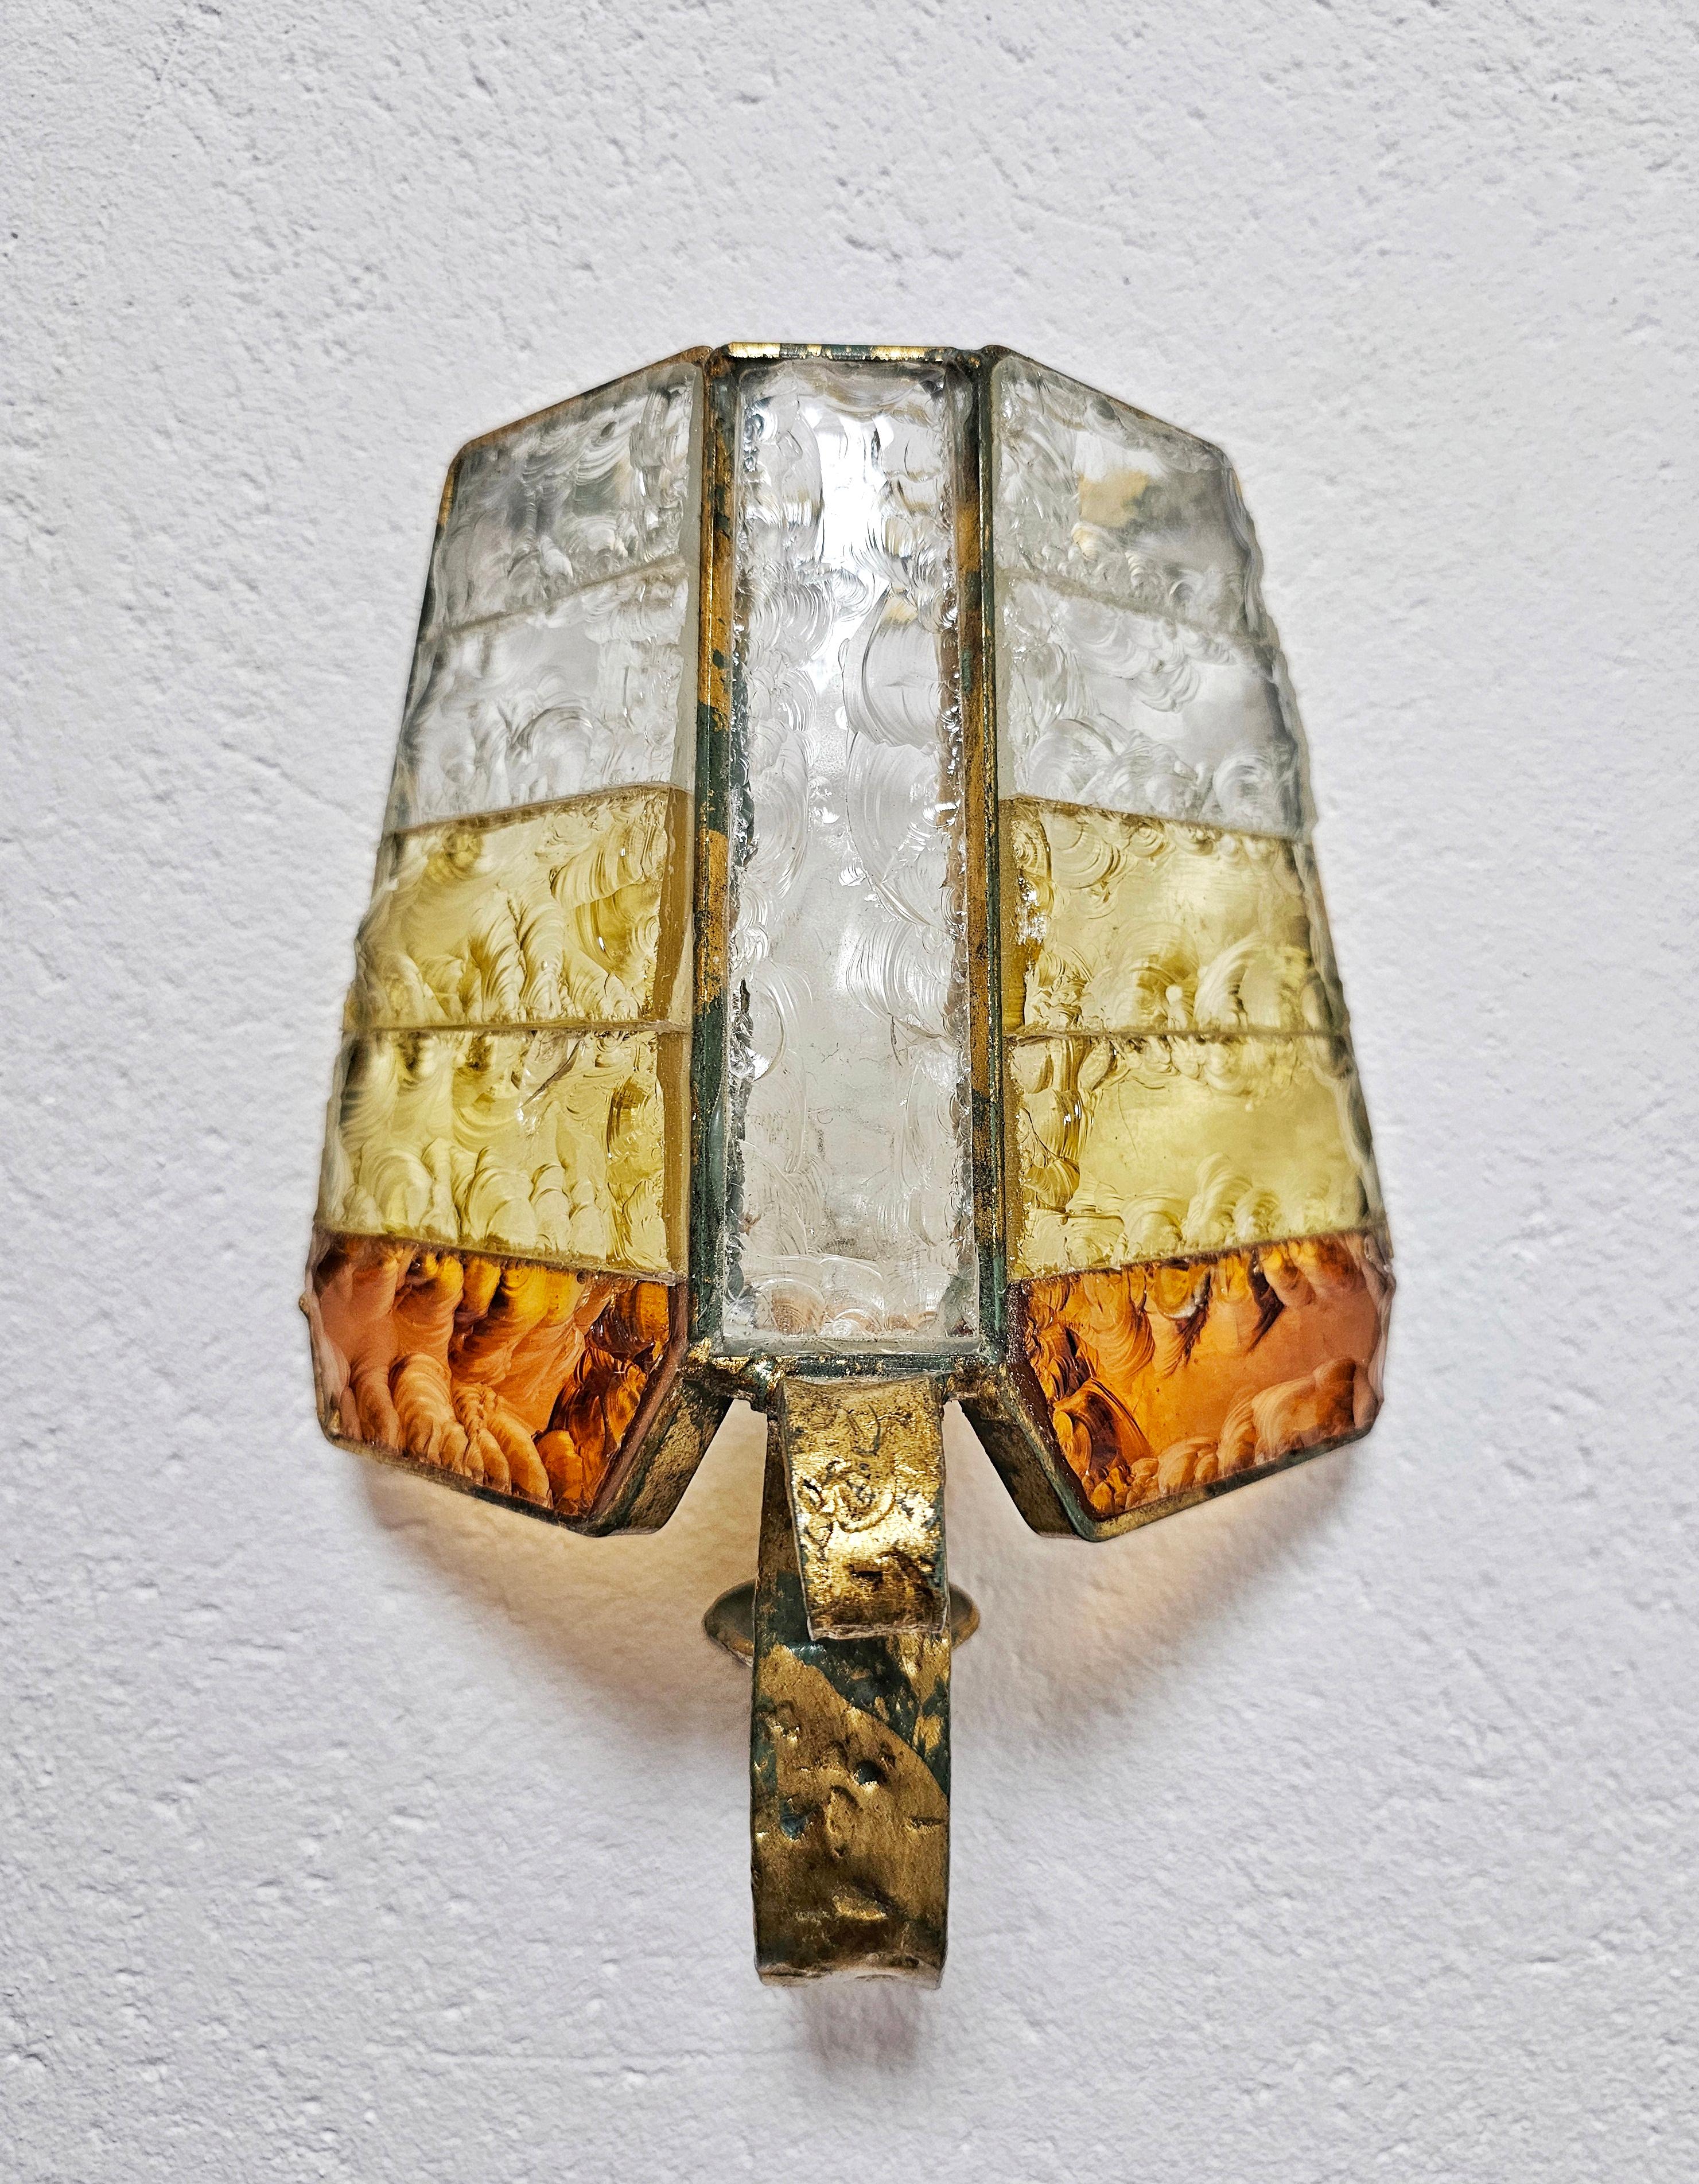 Steel Pair of Brutalist Sconces in hammered glass by Longobard, Italy 1970s For Sale